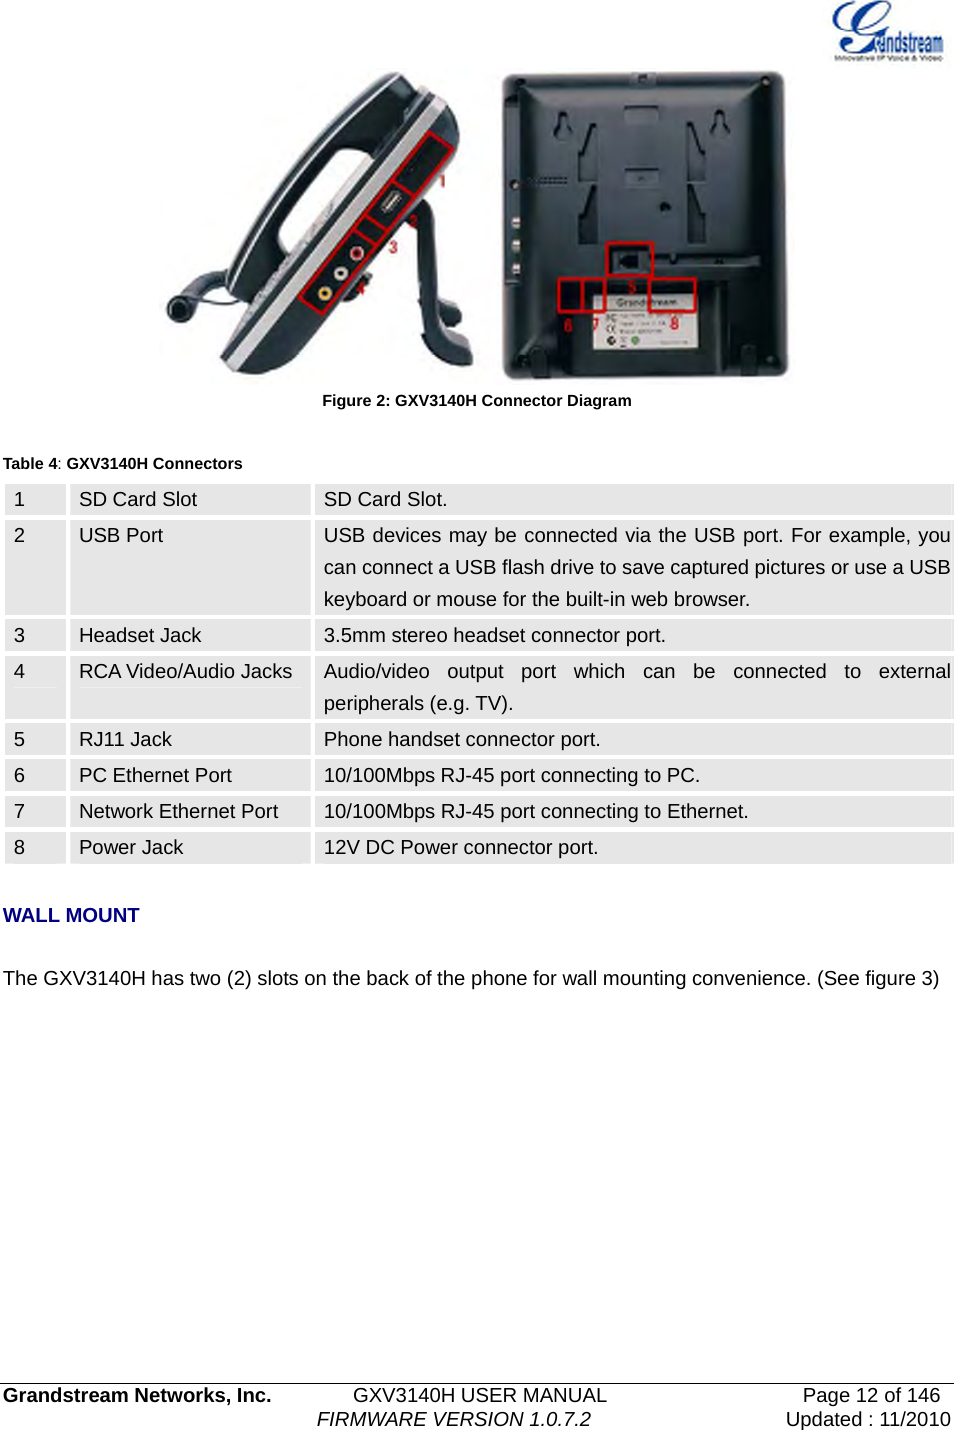   Grandstream Networks, Inc.        GXV3140H USER MANUAL                  Page 12 of 146                                FIRMWARE VERSION 1.0.7.2 Updated : 11/2010   Figure 2: GXV3140H Connector Diagram  Table 4: GXV3140H Connectors 1  SD Card Slot  SD Card Slot. 2  USB Port  USB devices may be connected via the USB port. For example, you can connect a USB flash drive to save captured pictures or use a USB keyboard or mouse for the built-in web browser. 3  Headset Jack  3.5mm stereo headset connector port. 4  RCA Video/Audio Jacks  Audio/video output port which can be connected to external peripherals (e.g. TV).   5  RJ11 Jack  Phone handset connector port. 6  PC Ethernet Port  10/100Mbps RJ-45 port connecting to PC. 7  Network Ethernet Port  10/100Mbps RJ-45 port connecting to Ethernet. 8  Power Jack  12V DC Power connector port.  WALL MOUNT  The GXV3140H has two (2) slots on the back of the phone for wall mounting convenience. (See figure 3) 